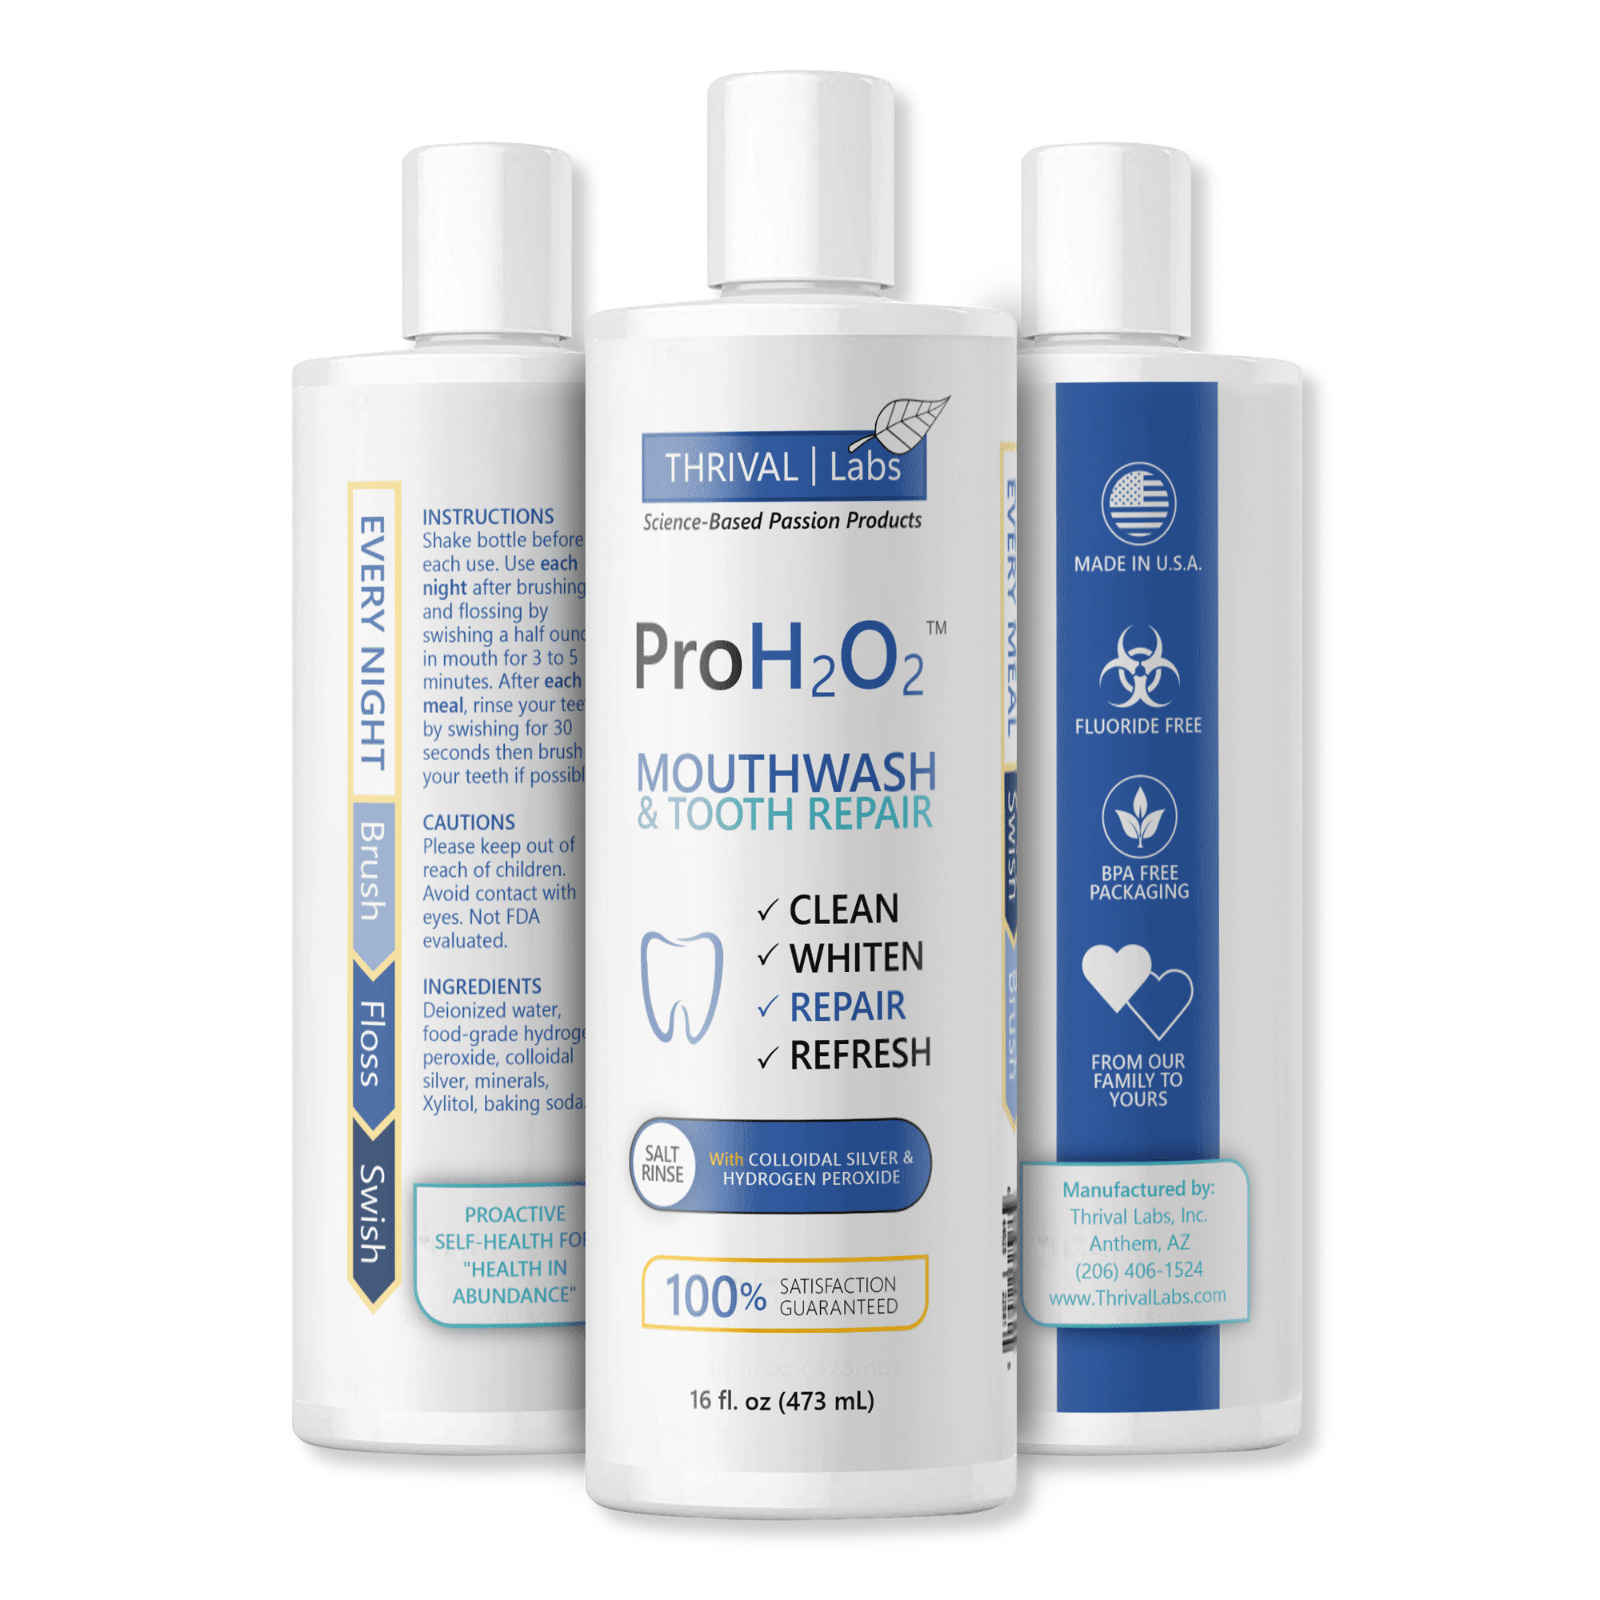 ProH2O2 Mouthwash & Tooth Repair by Thrival Labs, Press Top Dispensing